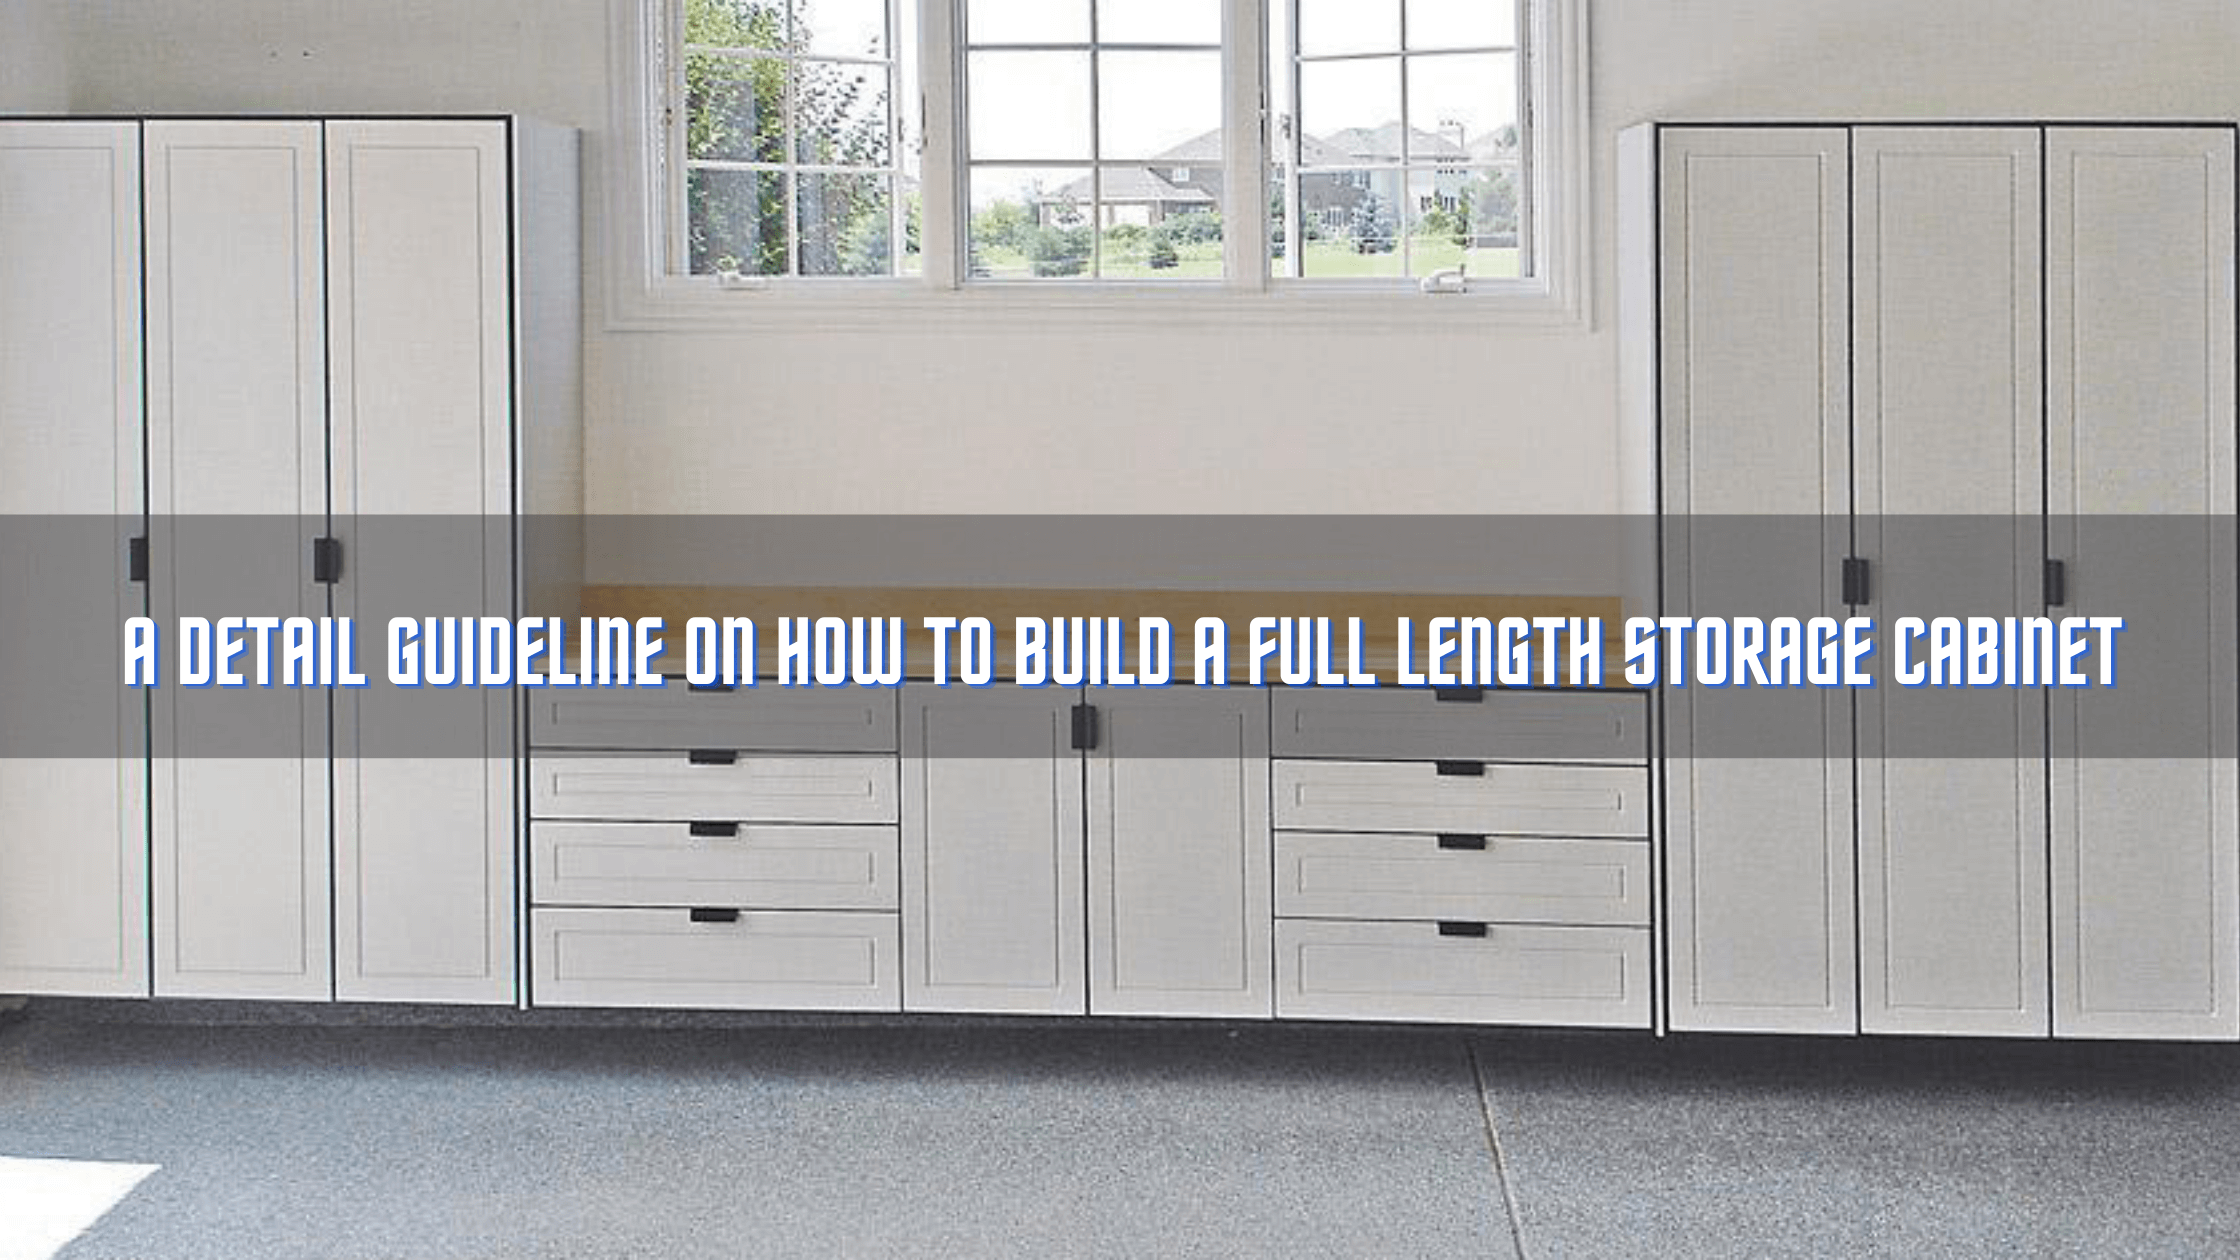 How to build a full length storage cabinet